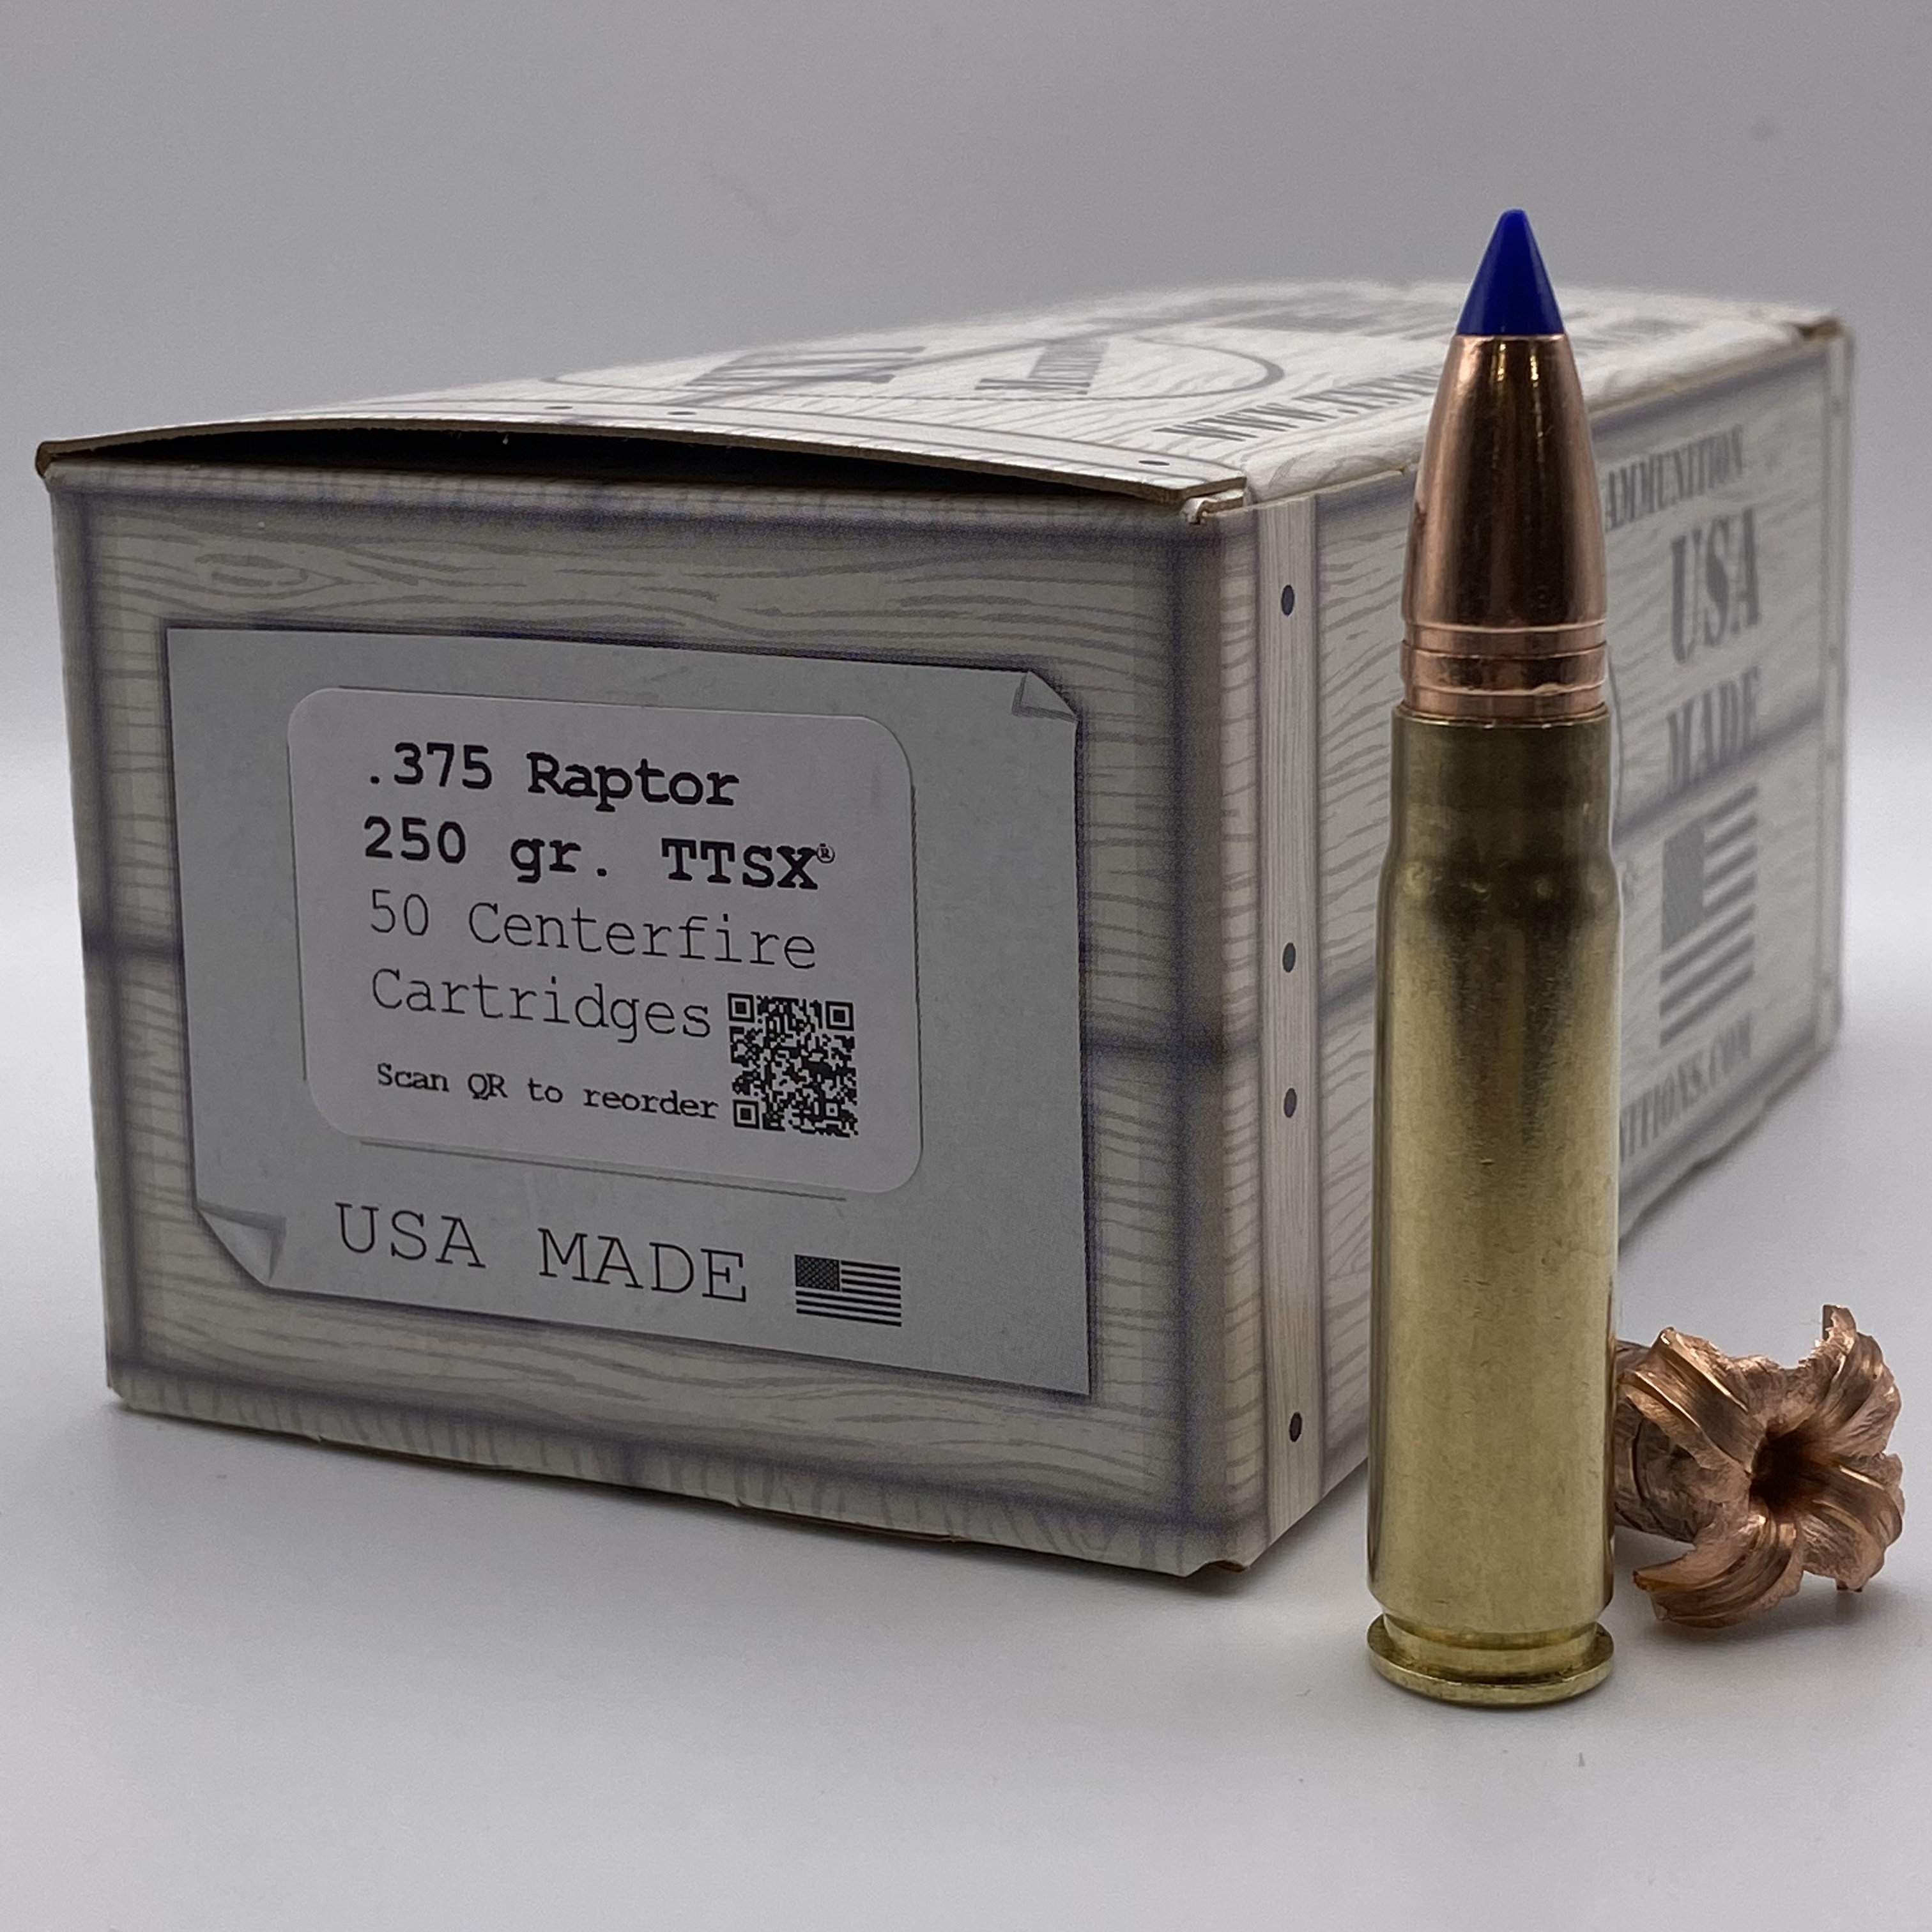 .375 Raptor 250 gr. Barnes TTSX. MEMORIAL DAY SALE! THROUGH MAY 29TH ONLY - SHIPS NBD  - (LEAD-FREE)